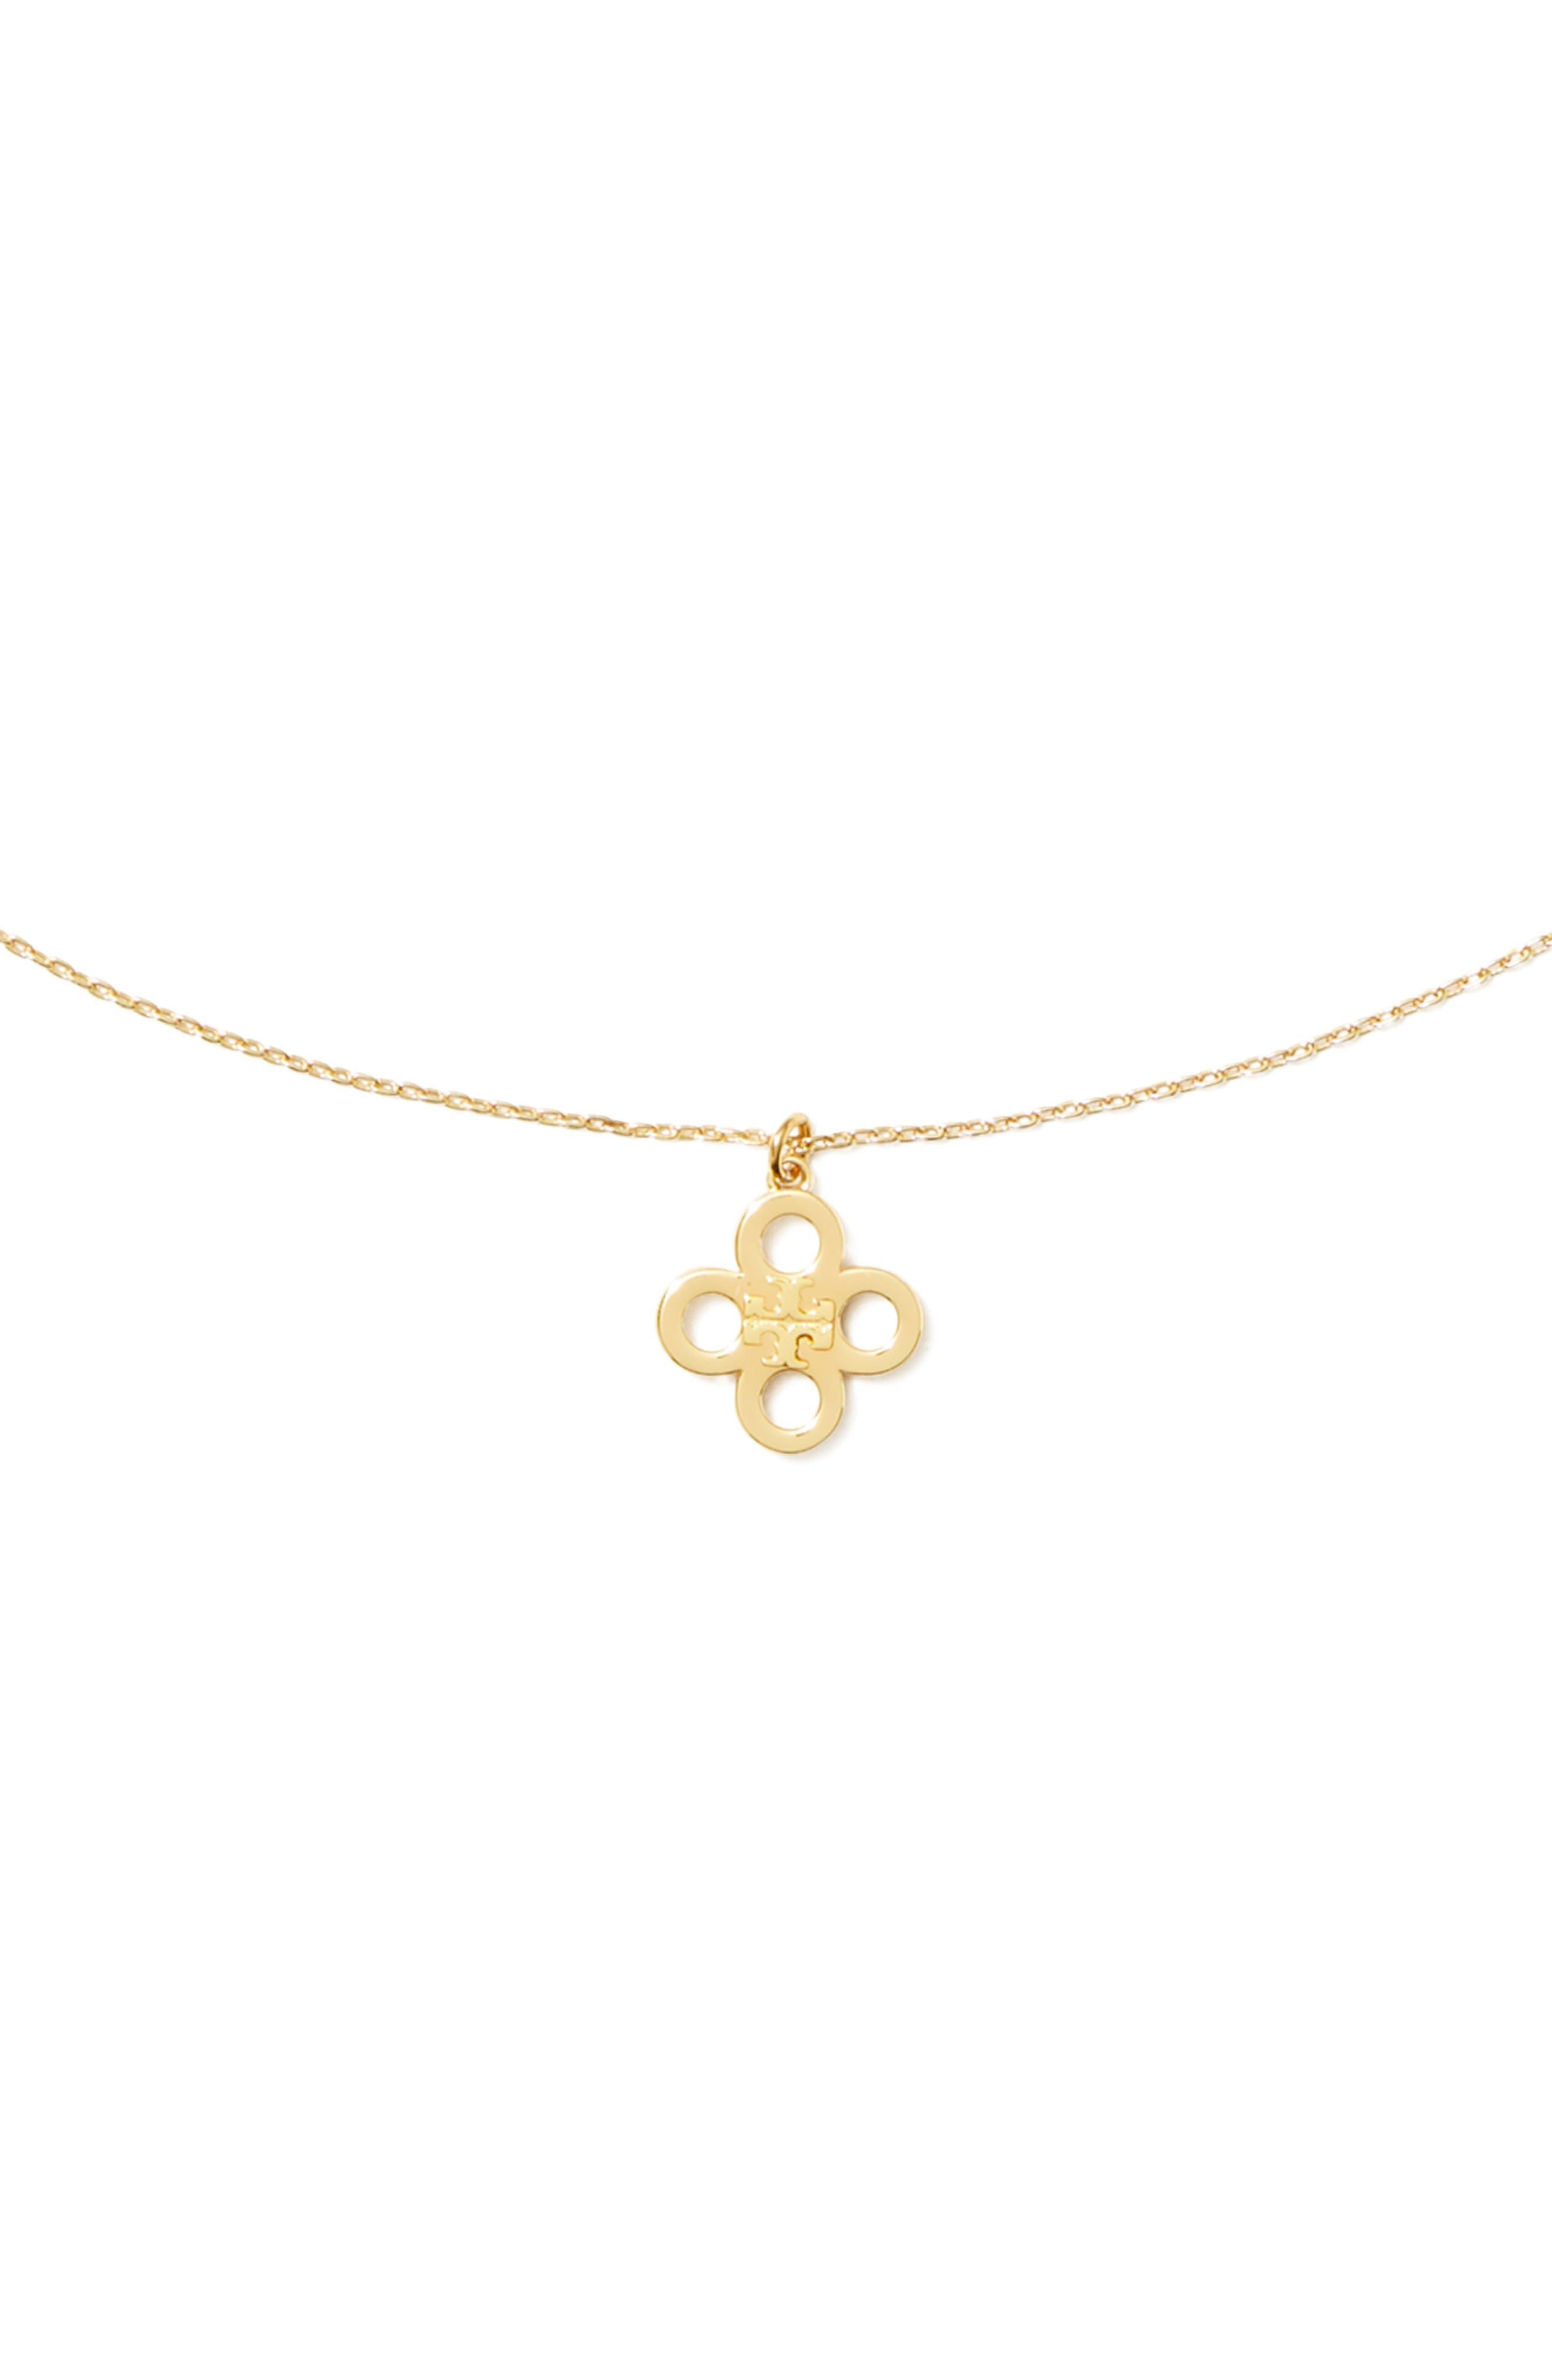 Kira Clover Necklace: Women's Jewelry, Necklaces